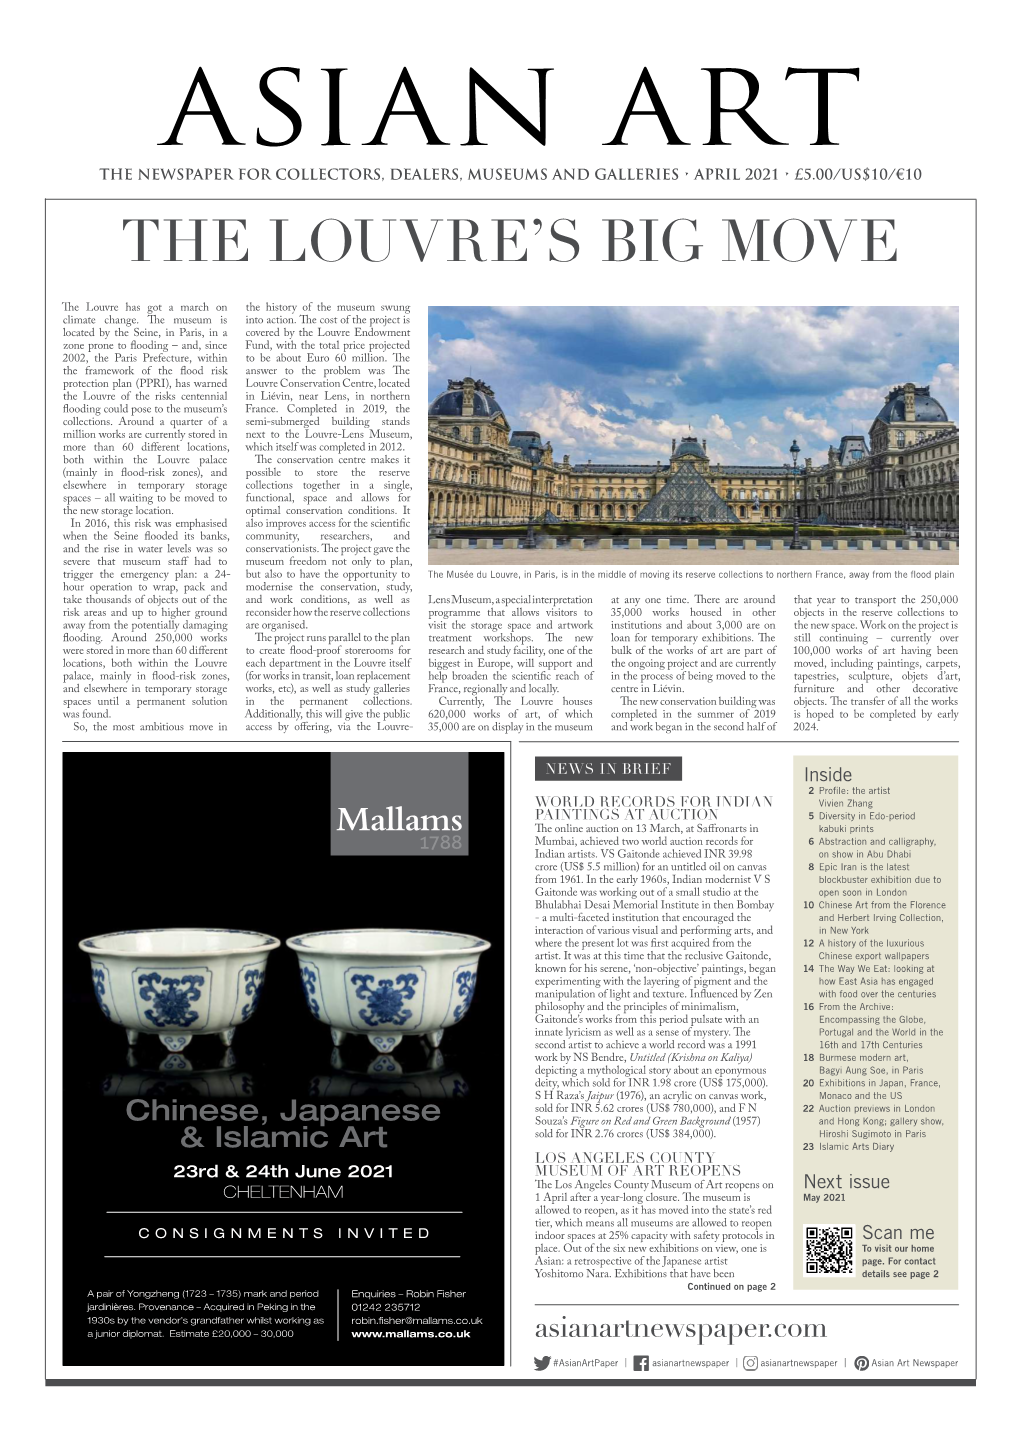 The Louvre's Big Move